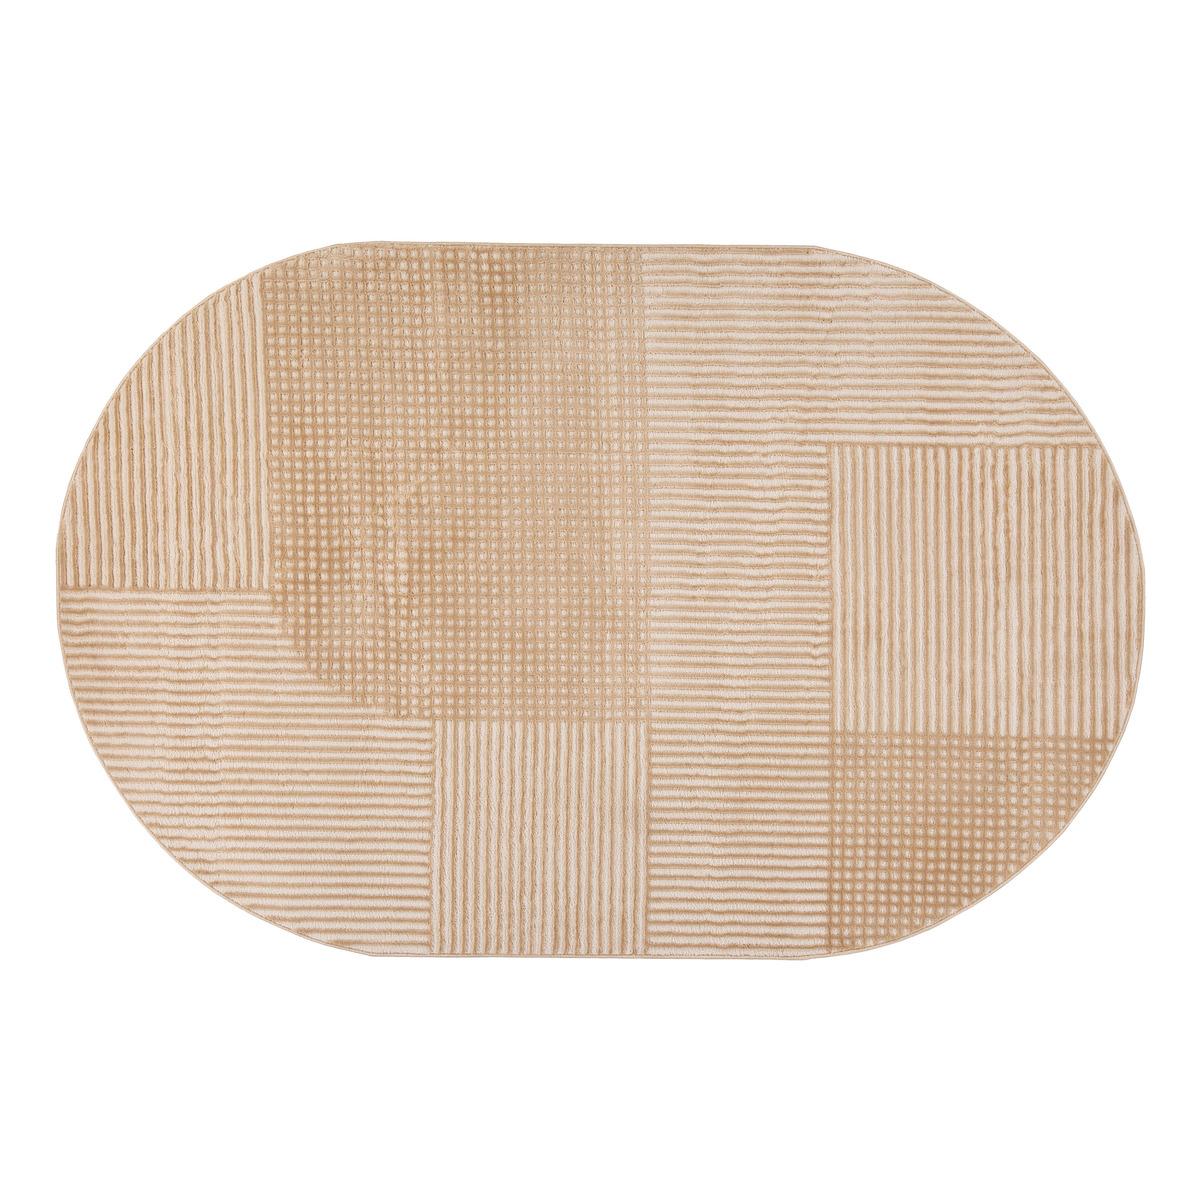 Inca Placemats Set of 4 & 6 Wooden Placemats Placemats Rectangle Placemat  Placemats Set table Mats place Mats-placemats Rectangle 